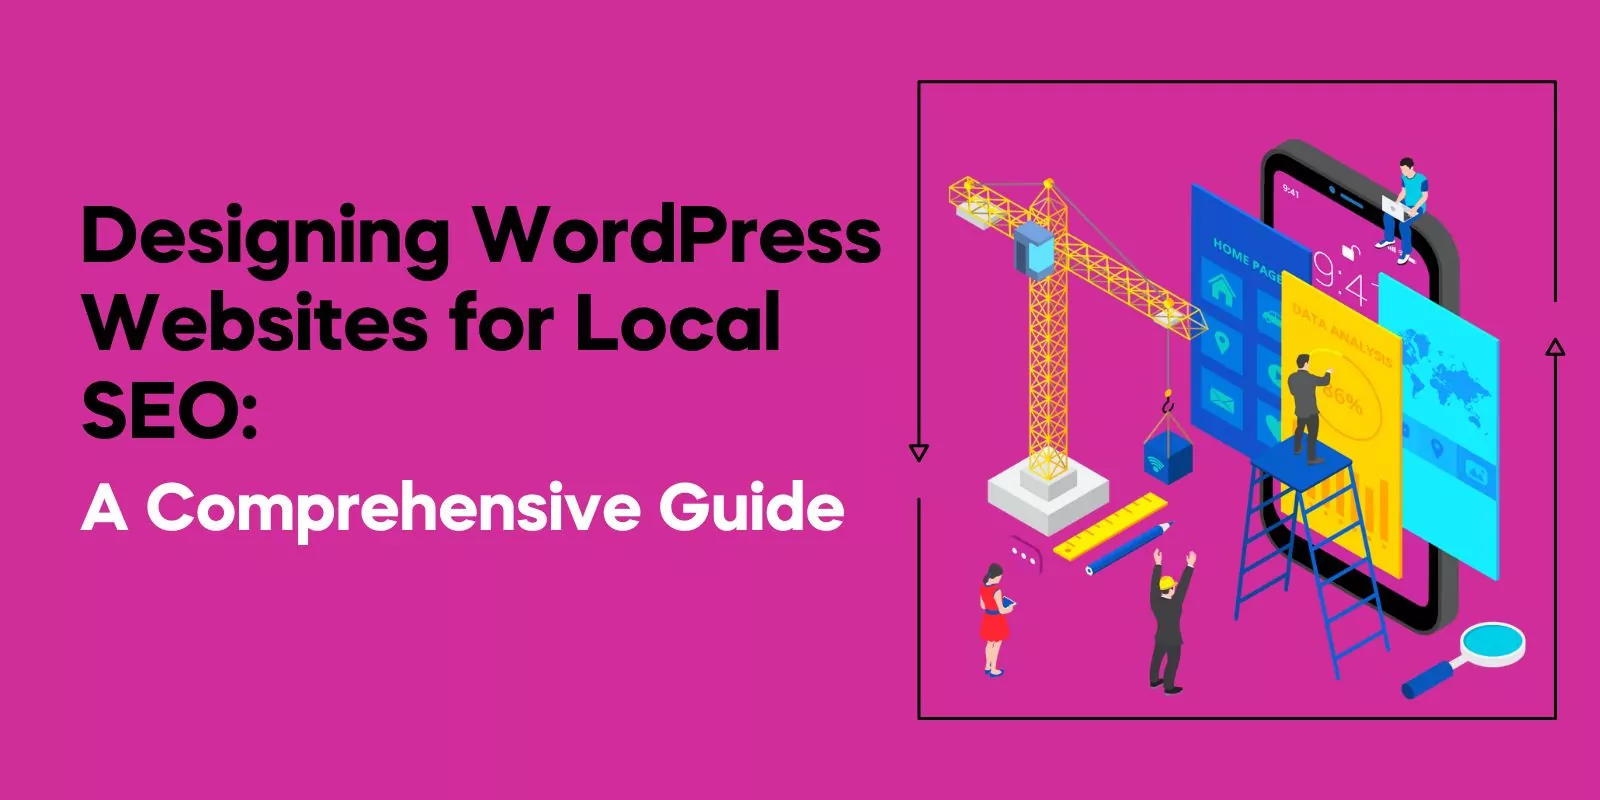 Designing WordPress Websites for Local SEO: A Comprehensive Guide